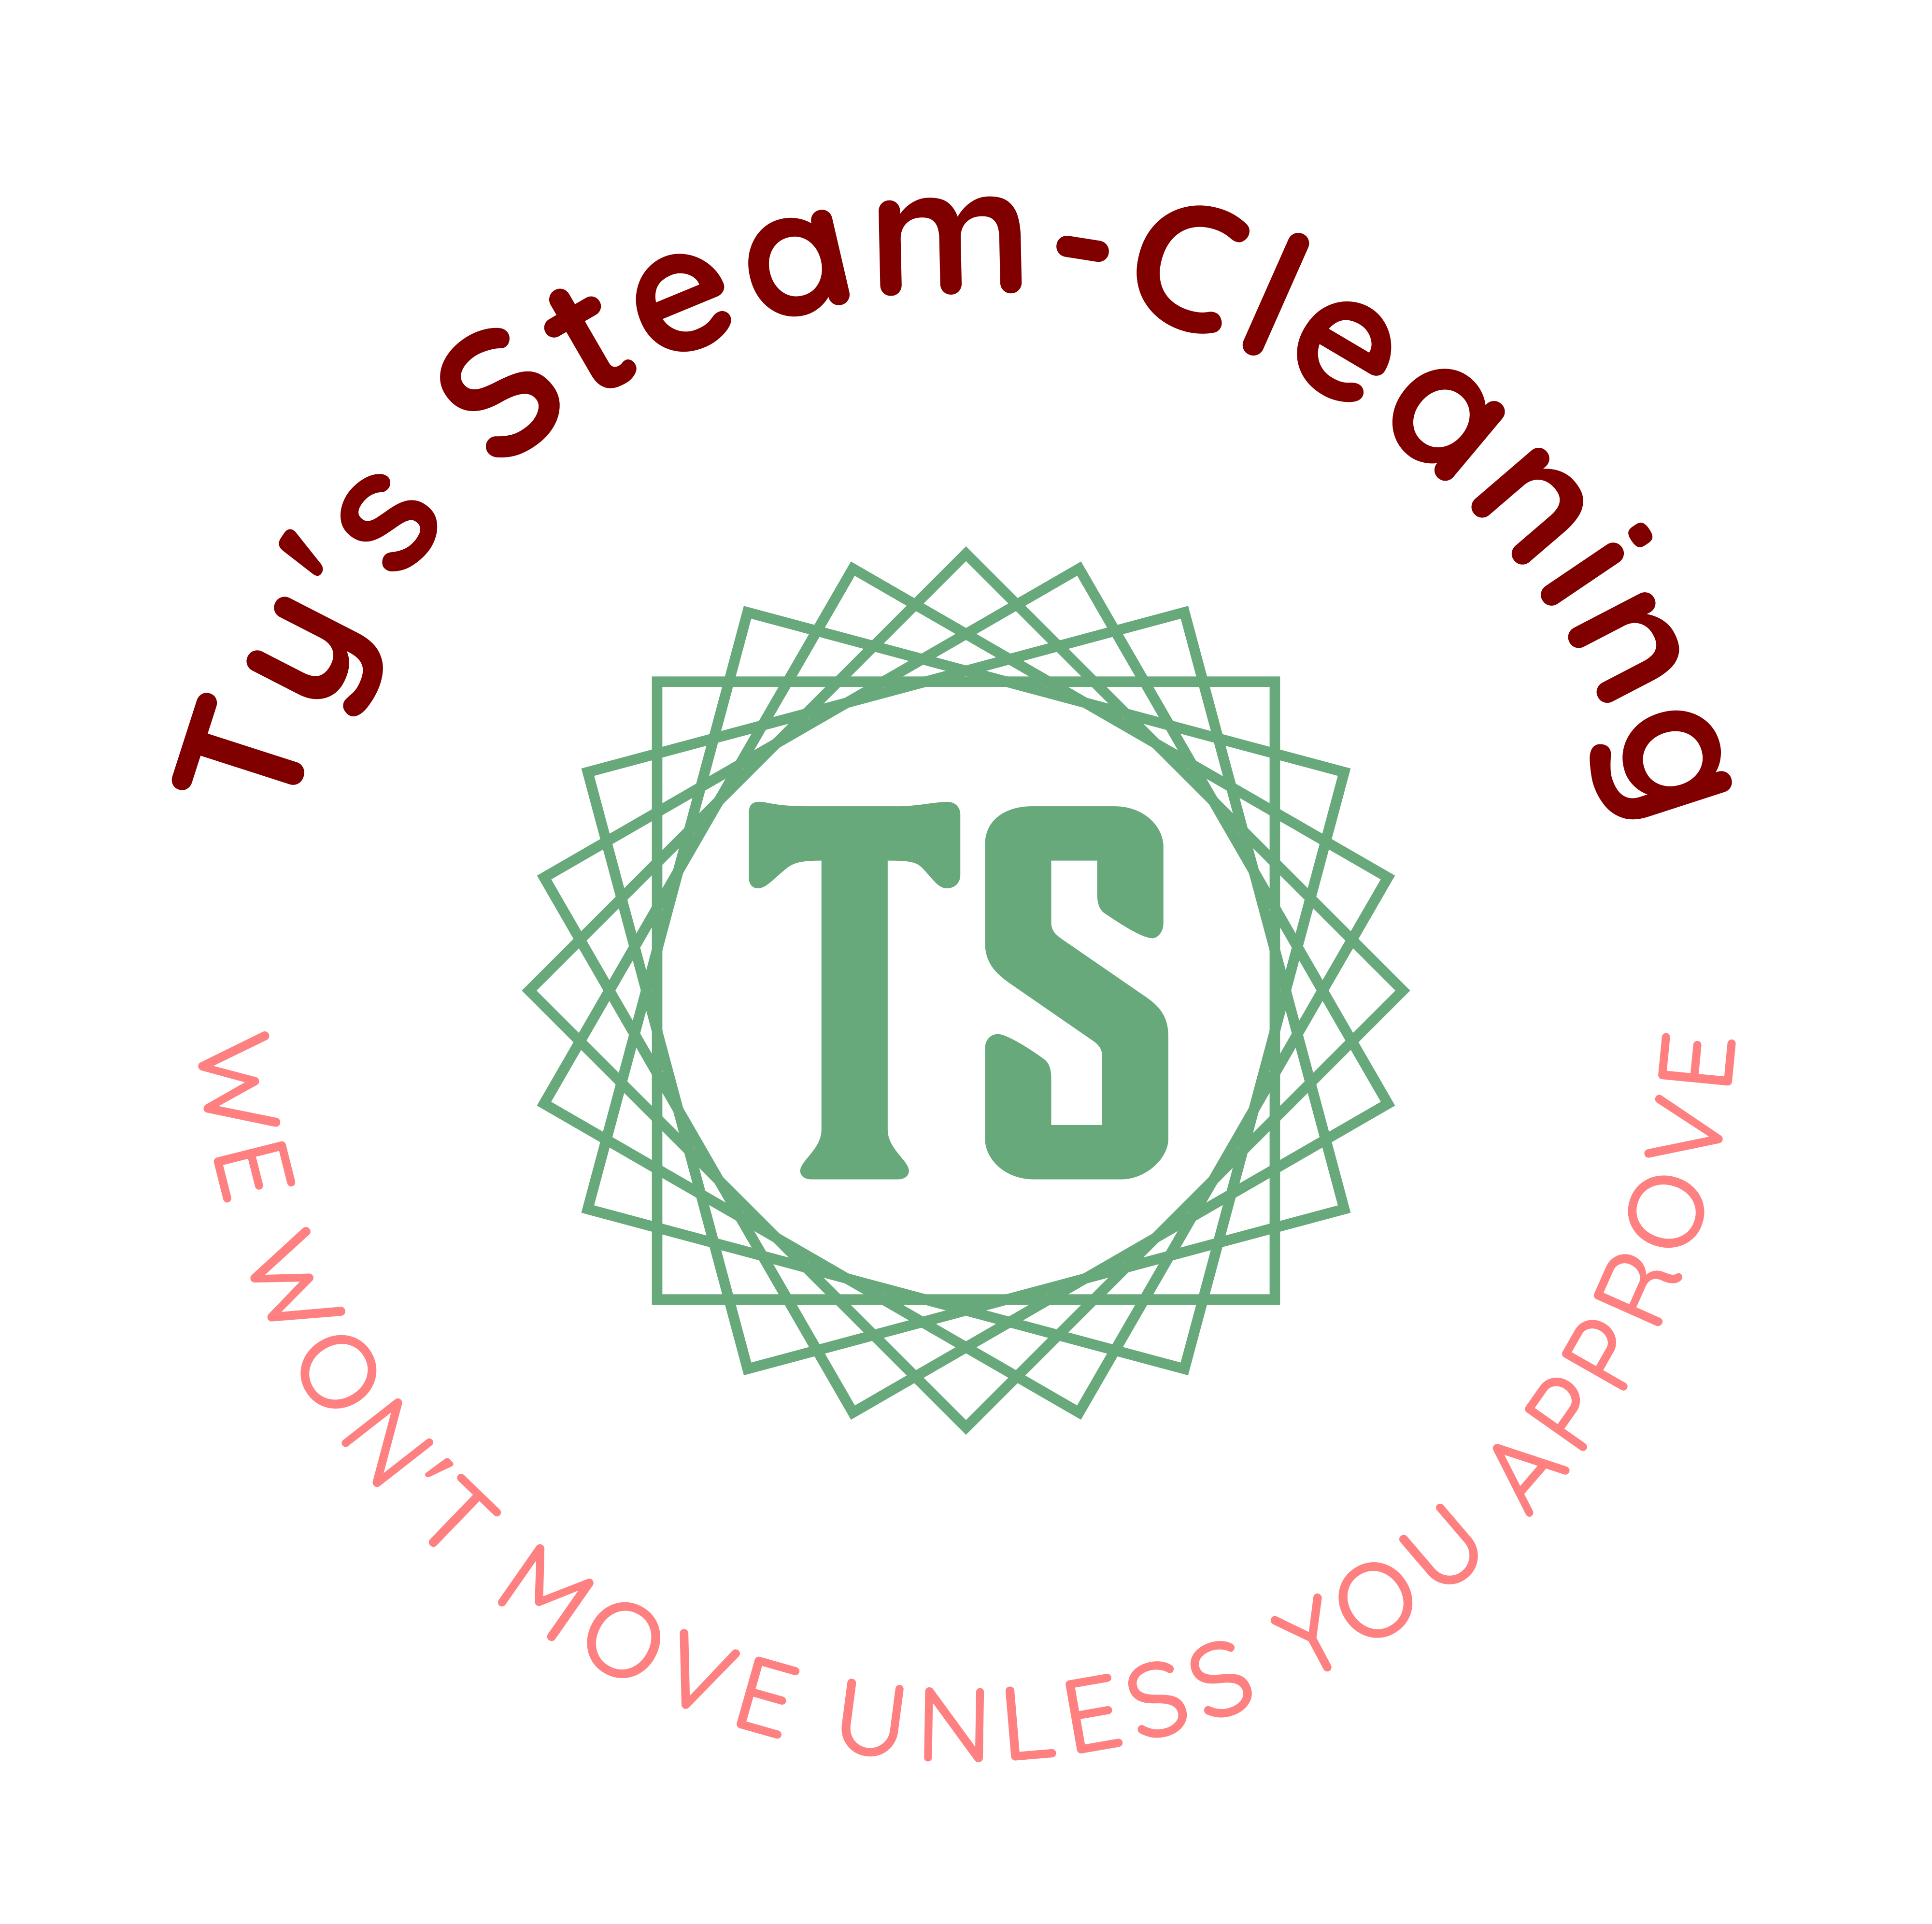 Ty's Steam-Cleaning Logo